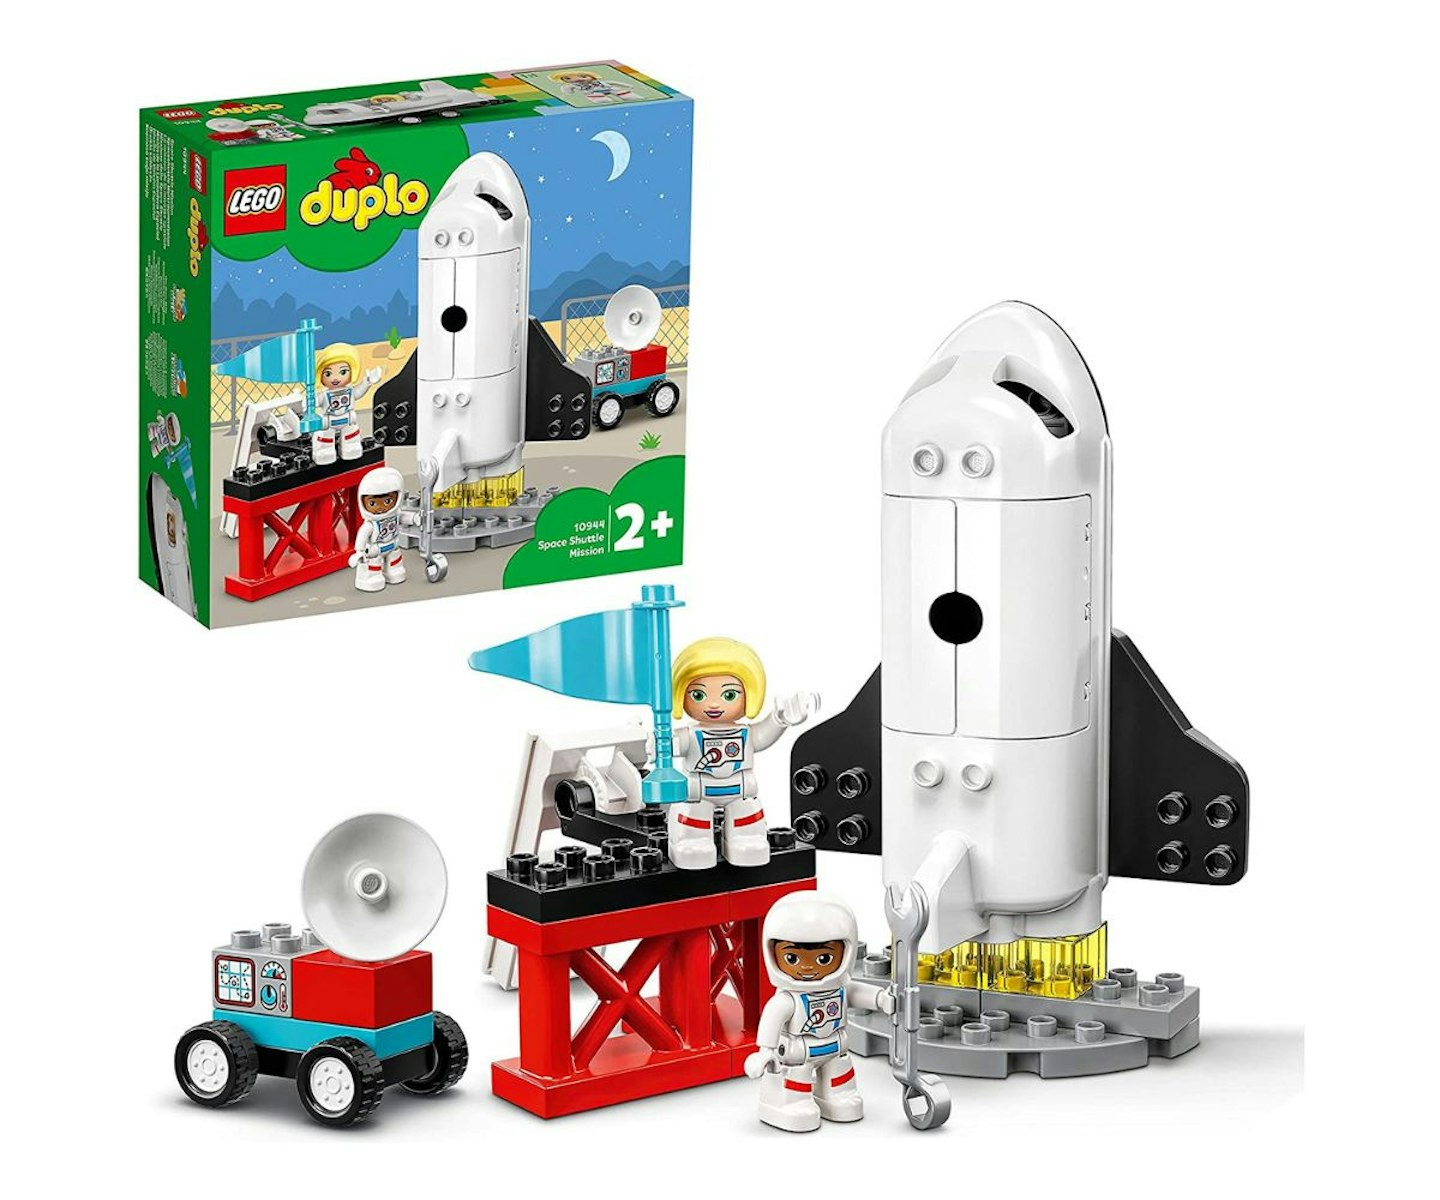 best-space-toys